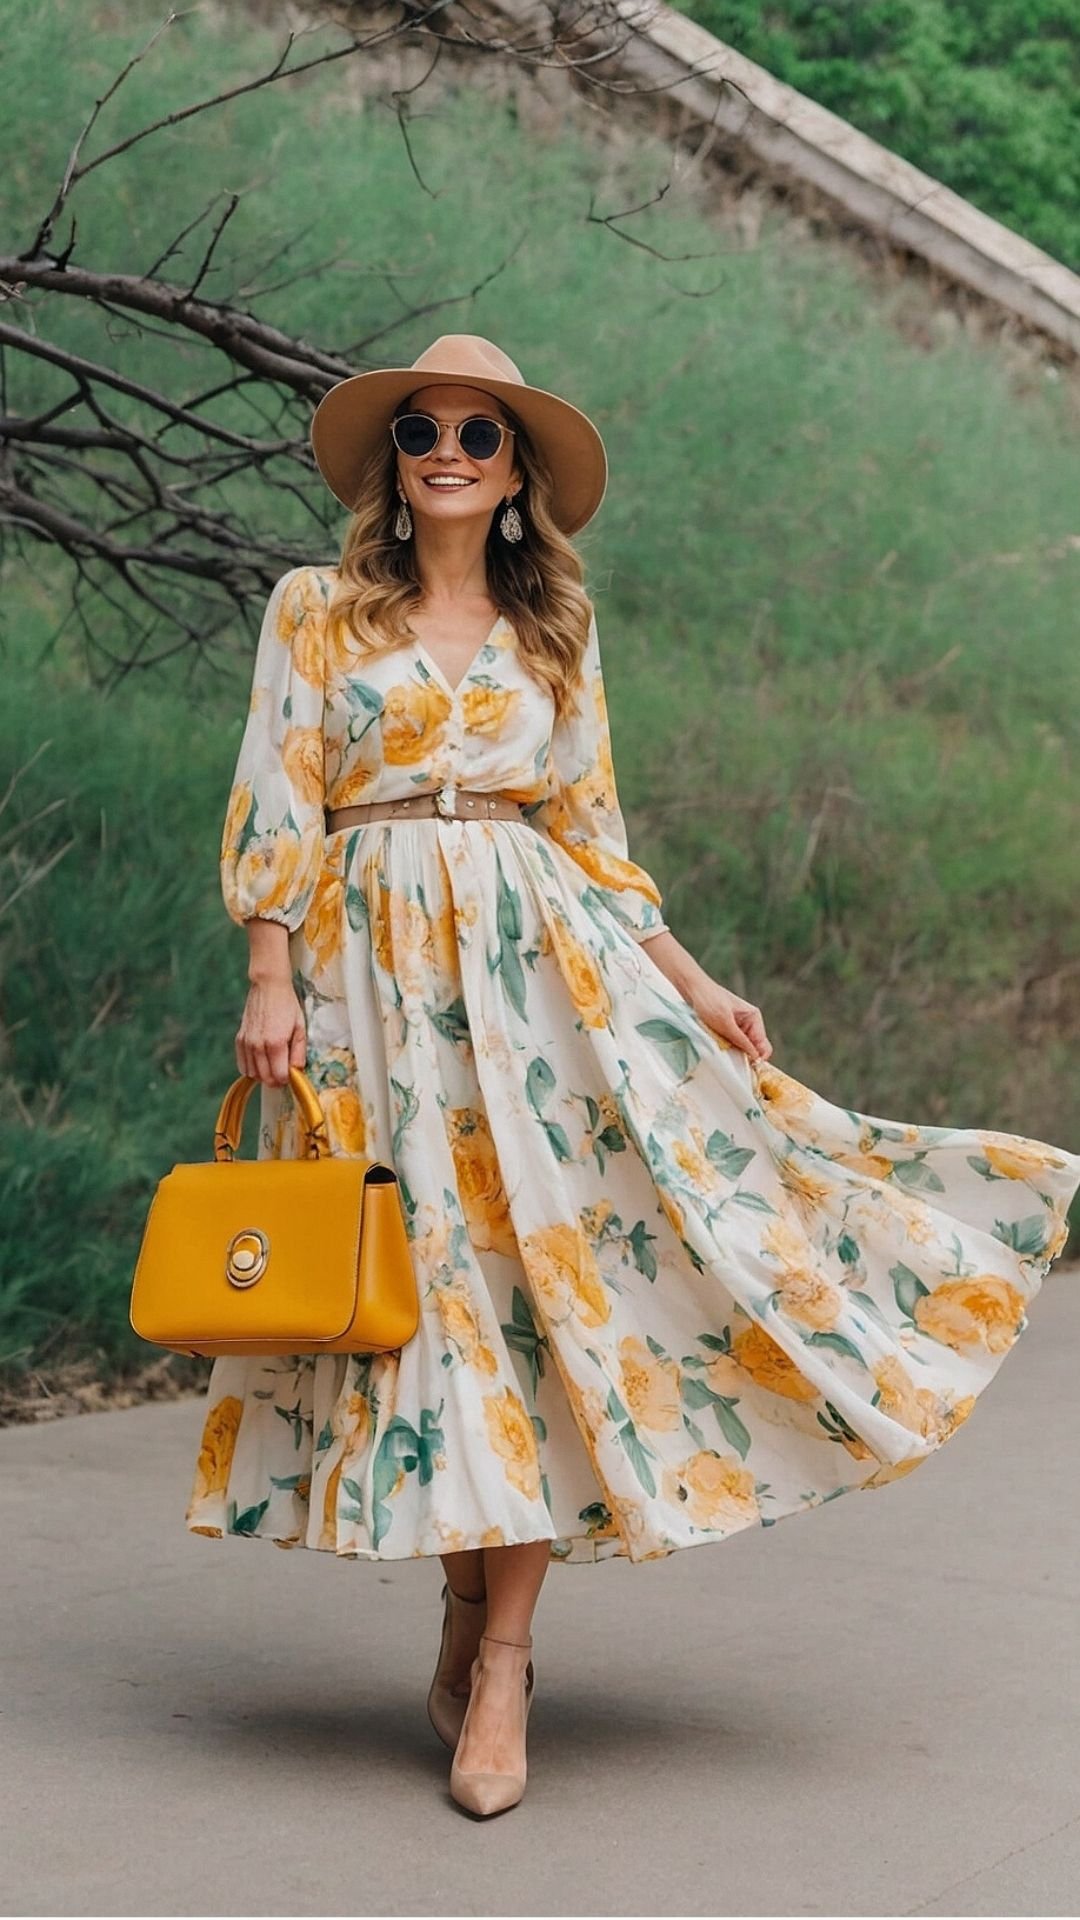 Sunny Days Ahead: Vibrant Yellow Floral Dress & Accessories